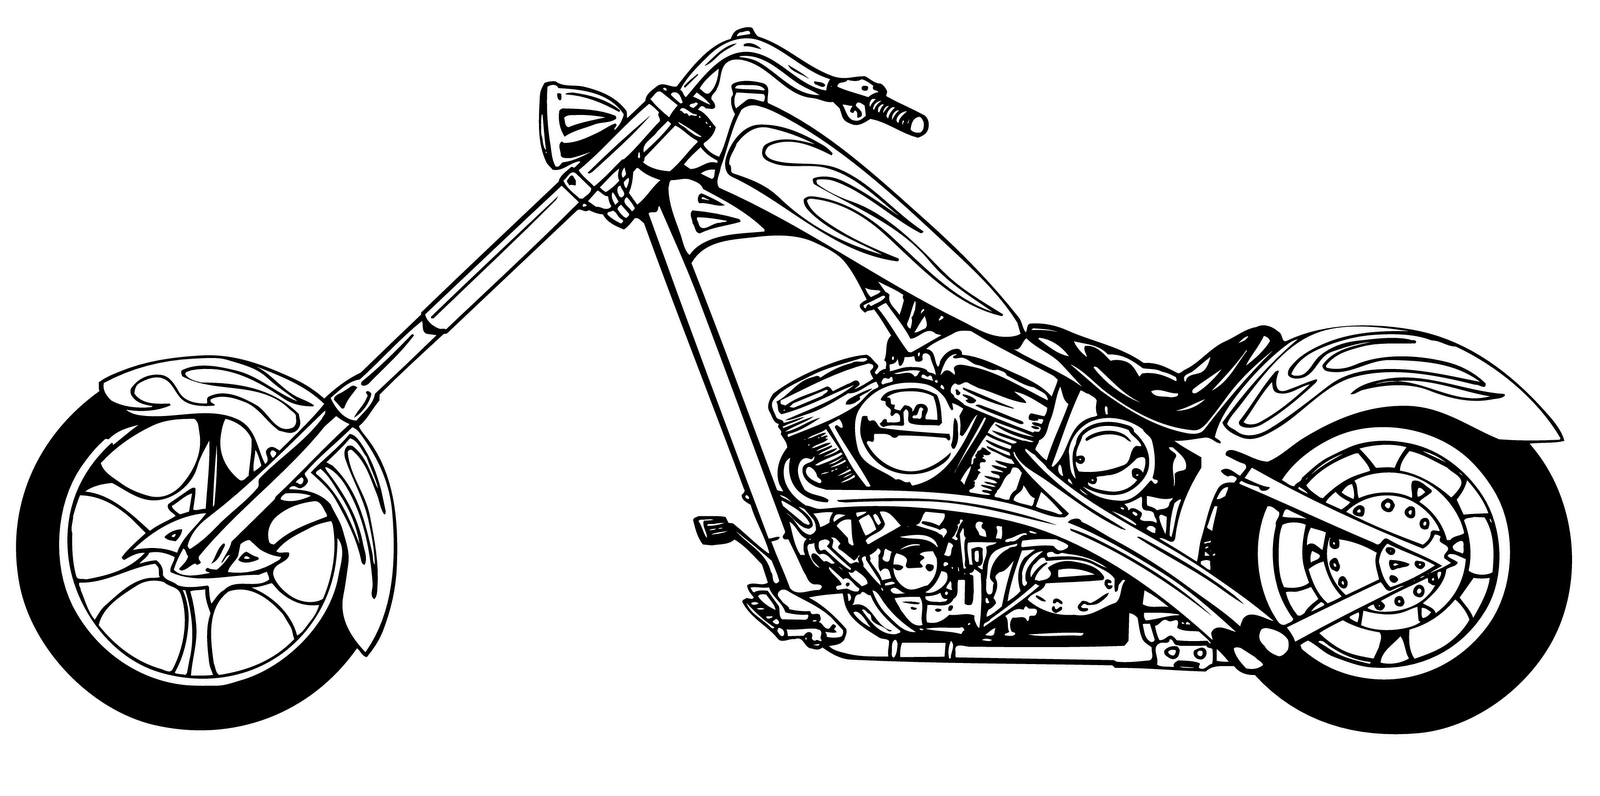 Harley Davidson Harley Motorcycle Black And White Clipart